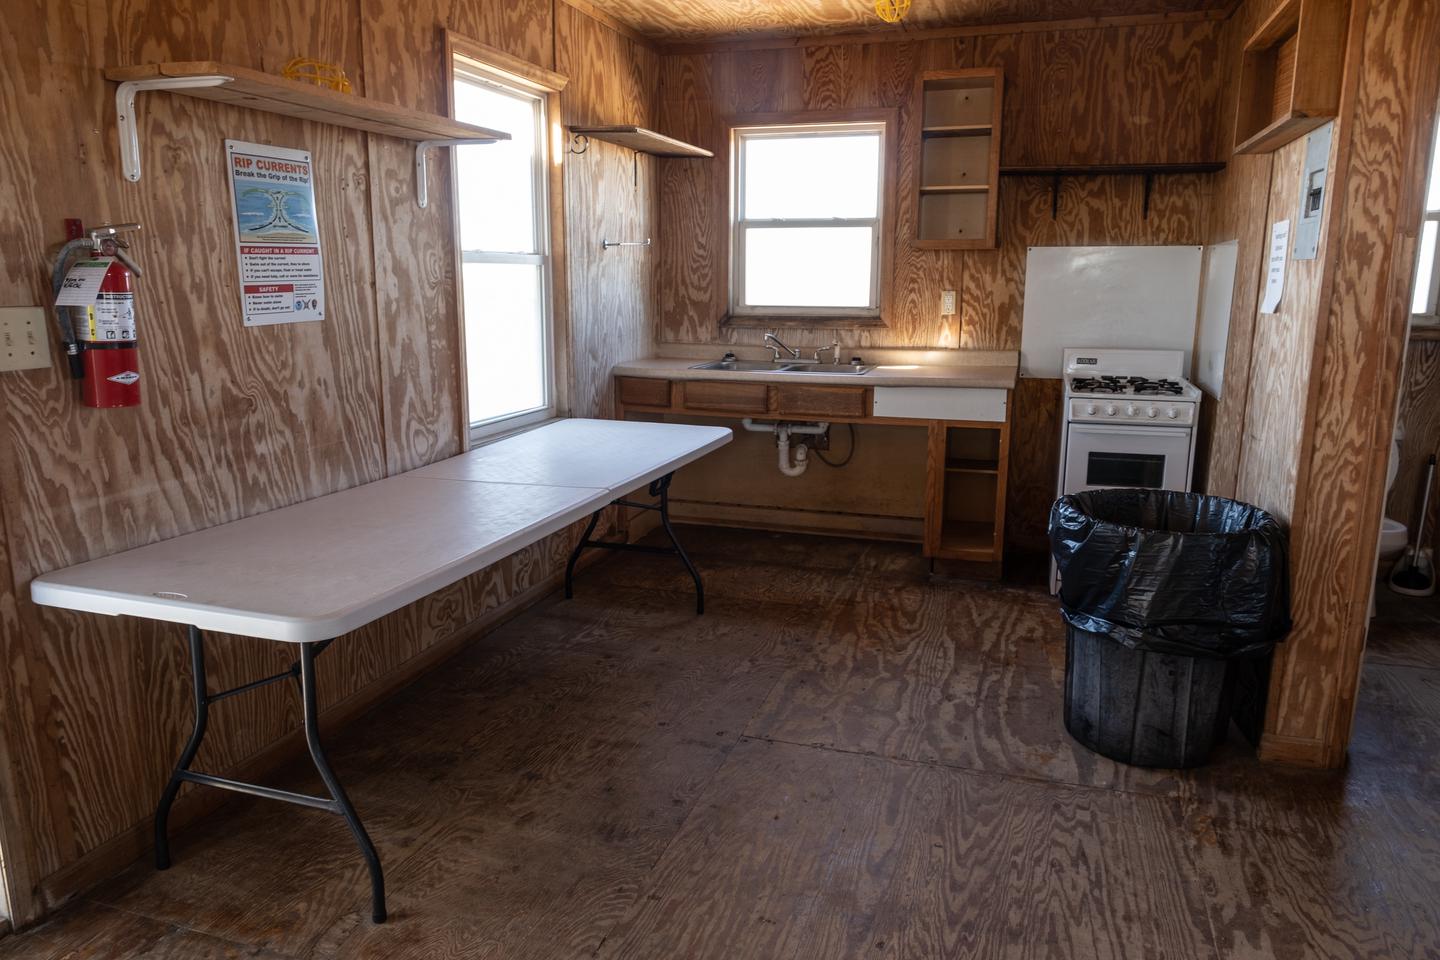 A view of the kitchen area, showing a table, sink, countertop, and propane range, as well as the bathroom doorway to the right.Kitchen area.